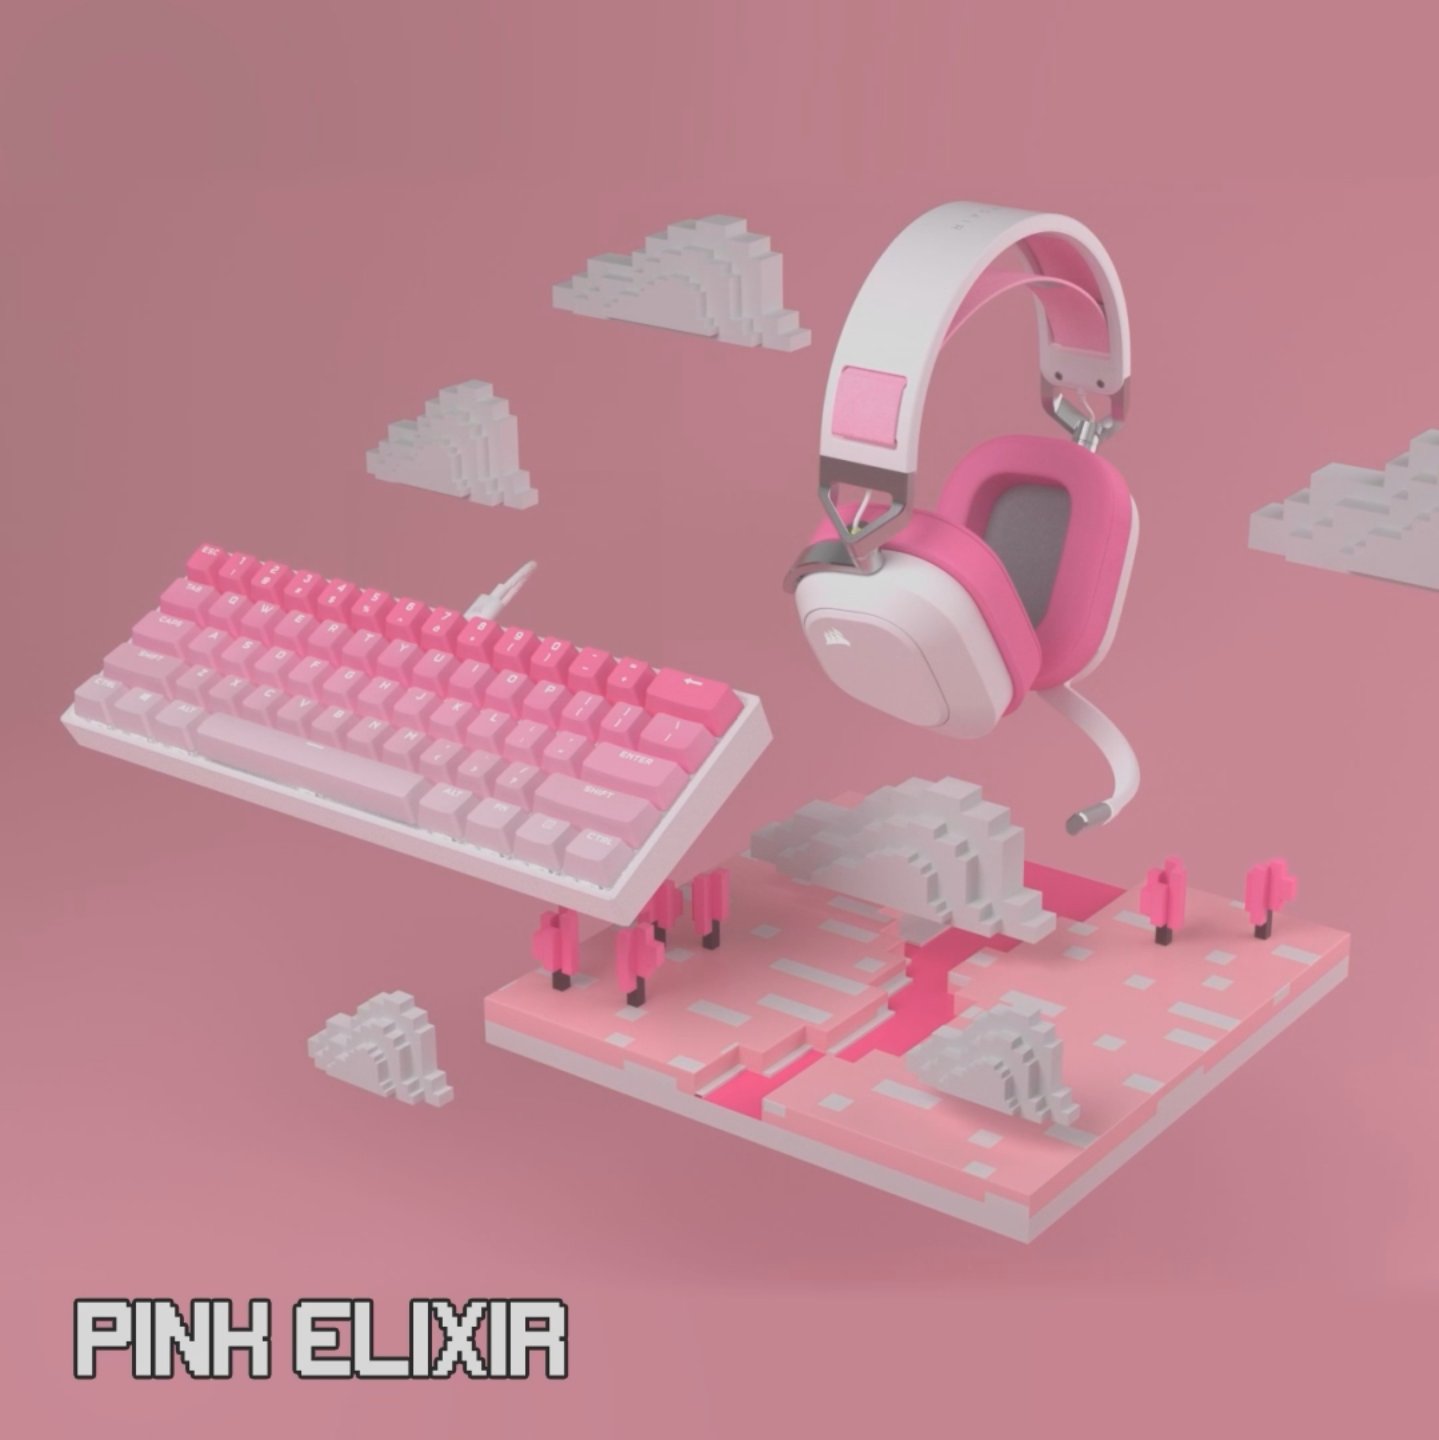 CORSAIR on X: @elgato The perfect match to the Pink Elixir combo